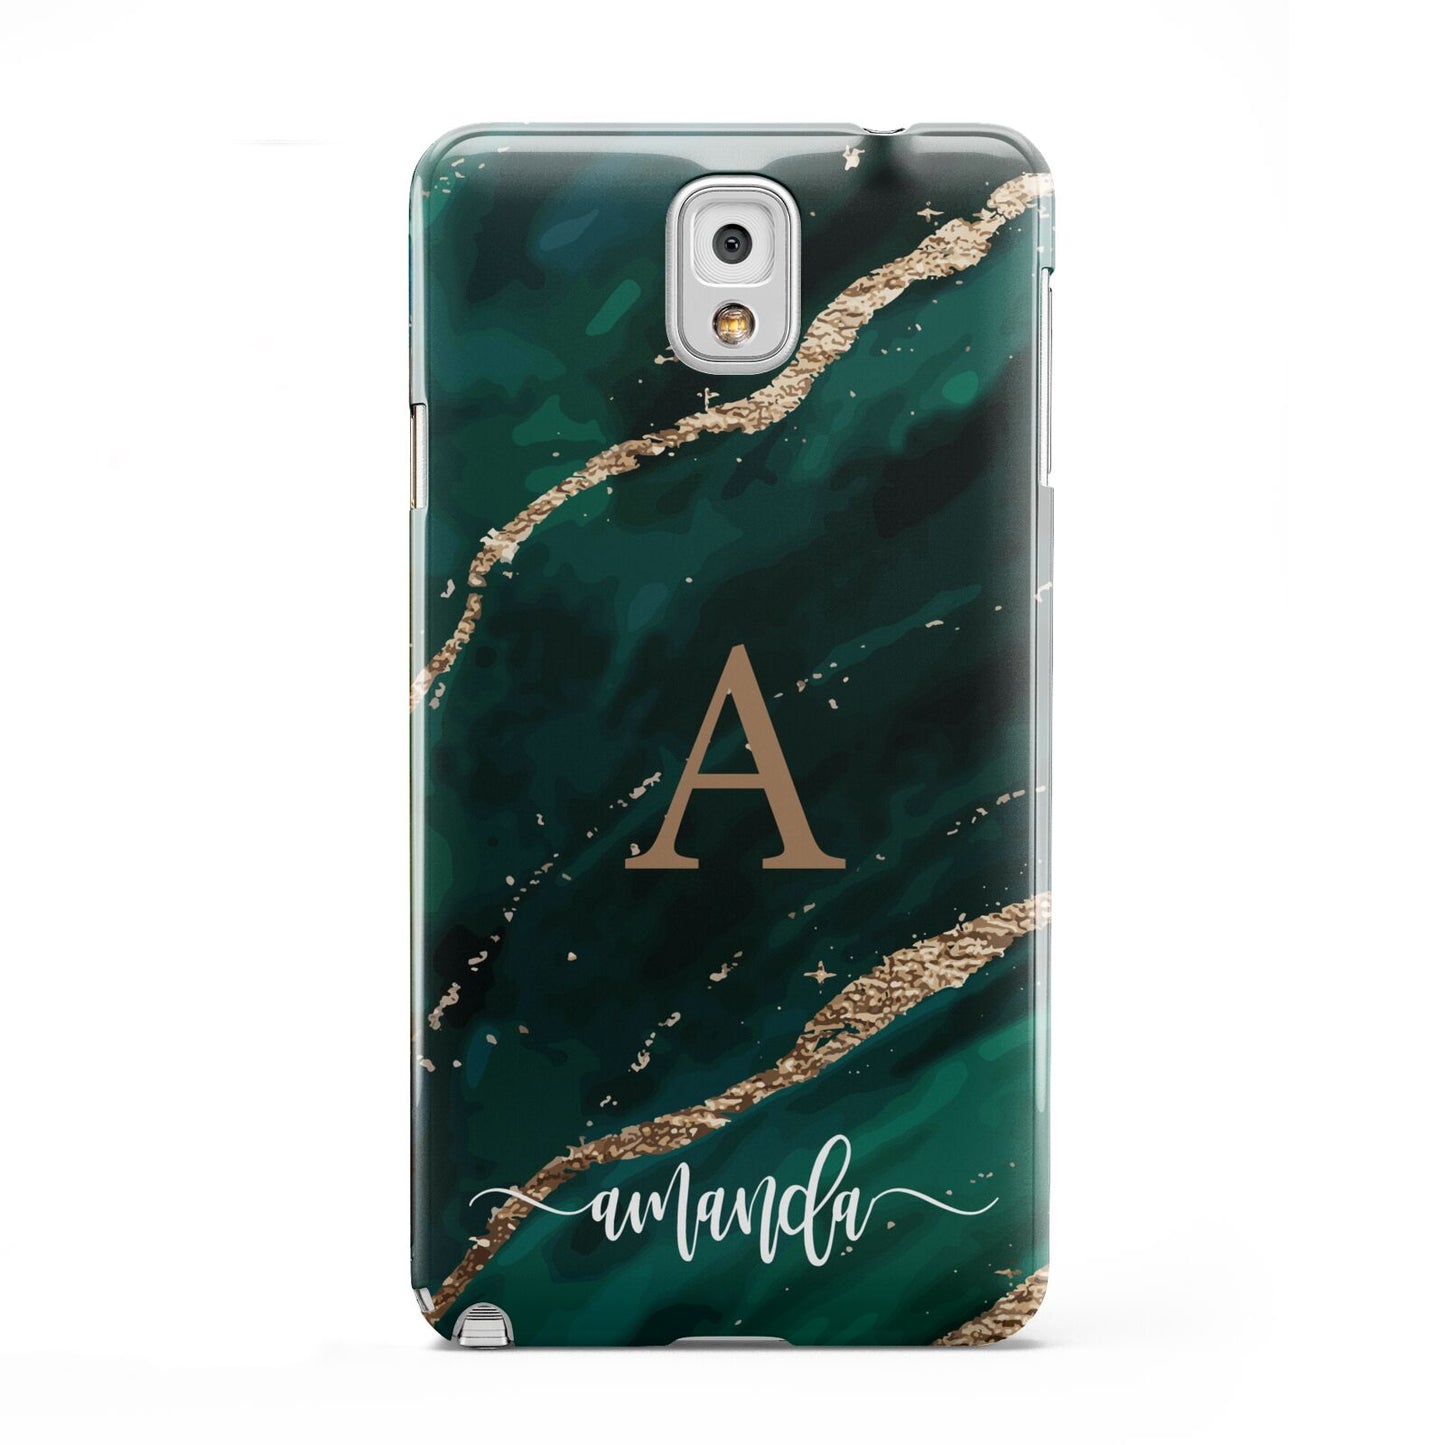 Green Marble Samsung Galaxy Note 3 Case